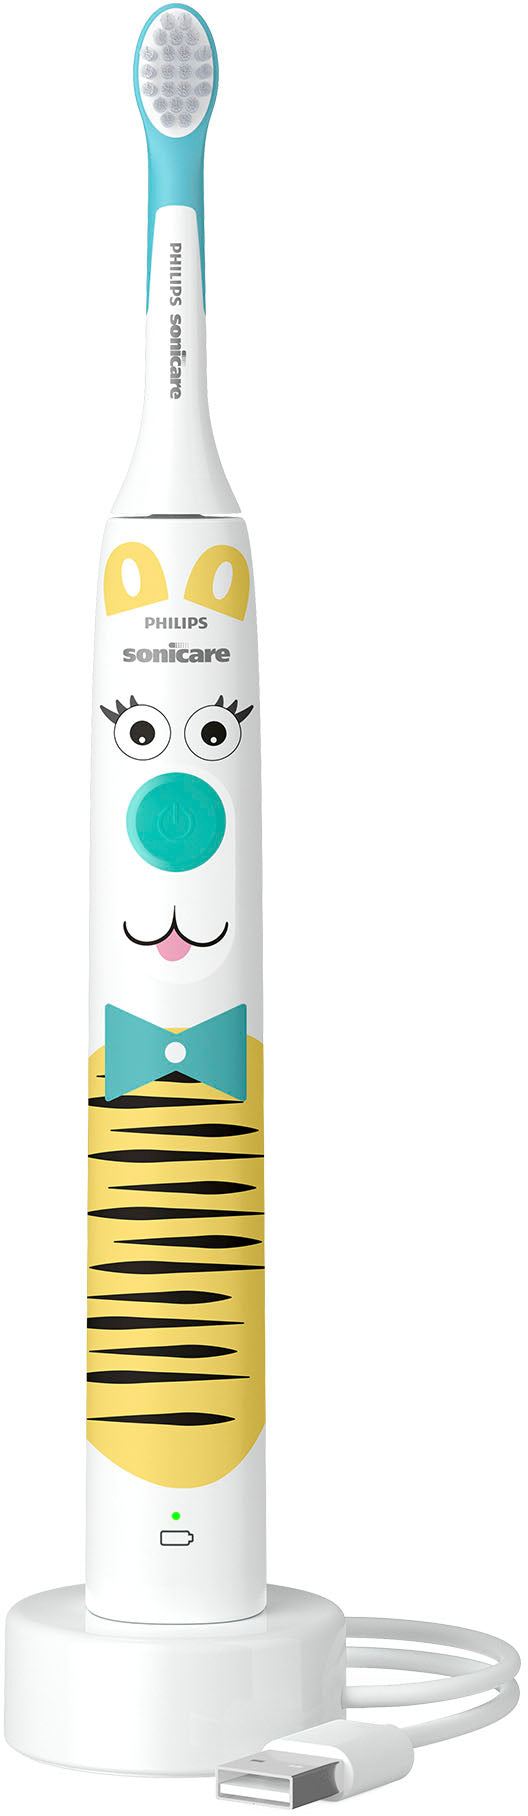 Philips Sonicare - Sonicare for Kids Design a Pet Edition Electric Toothbrush - White With Aqua Blue Button_2